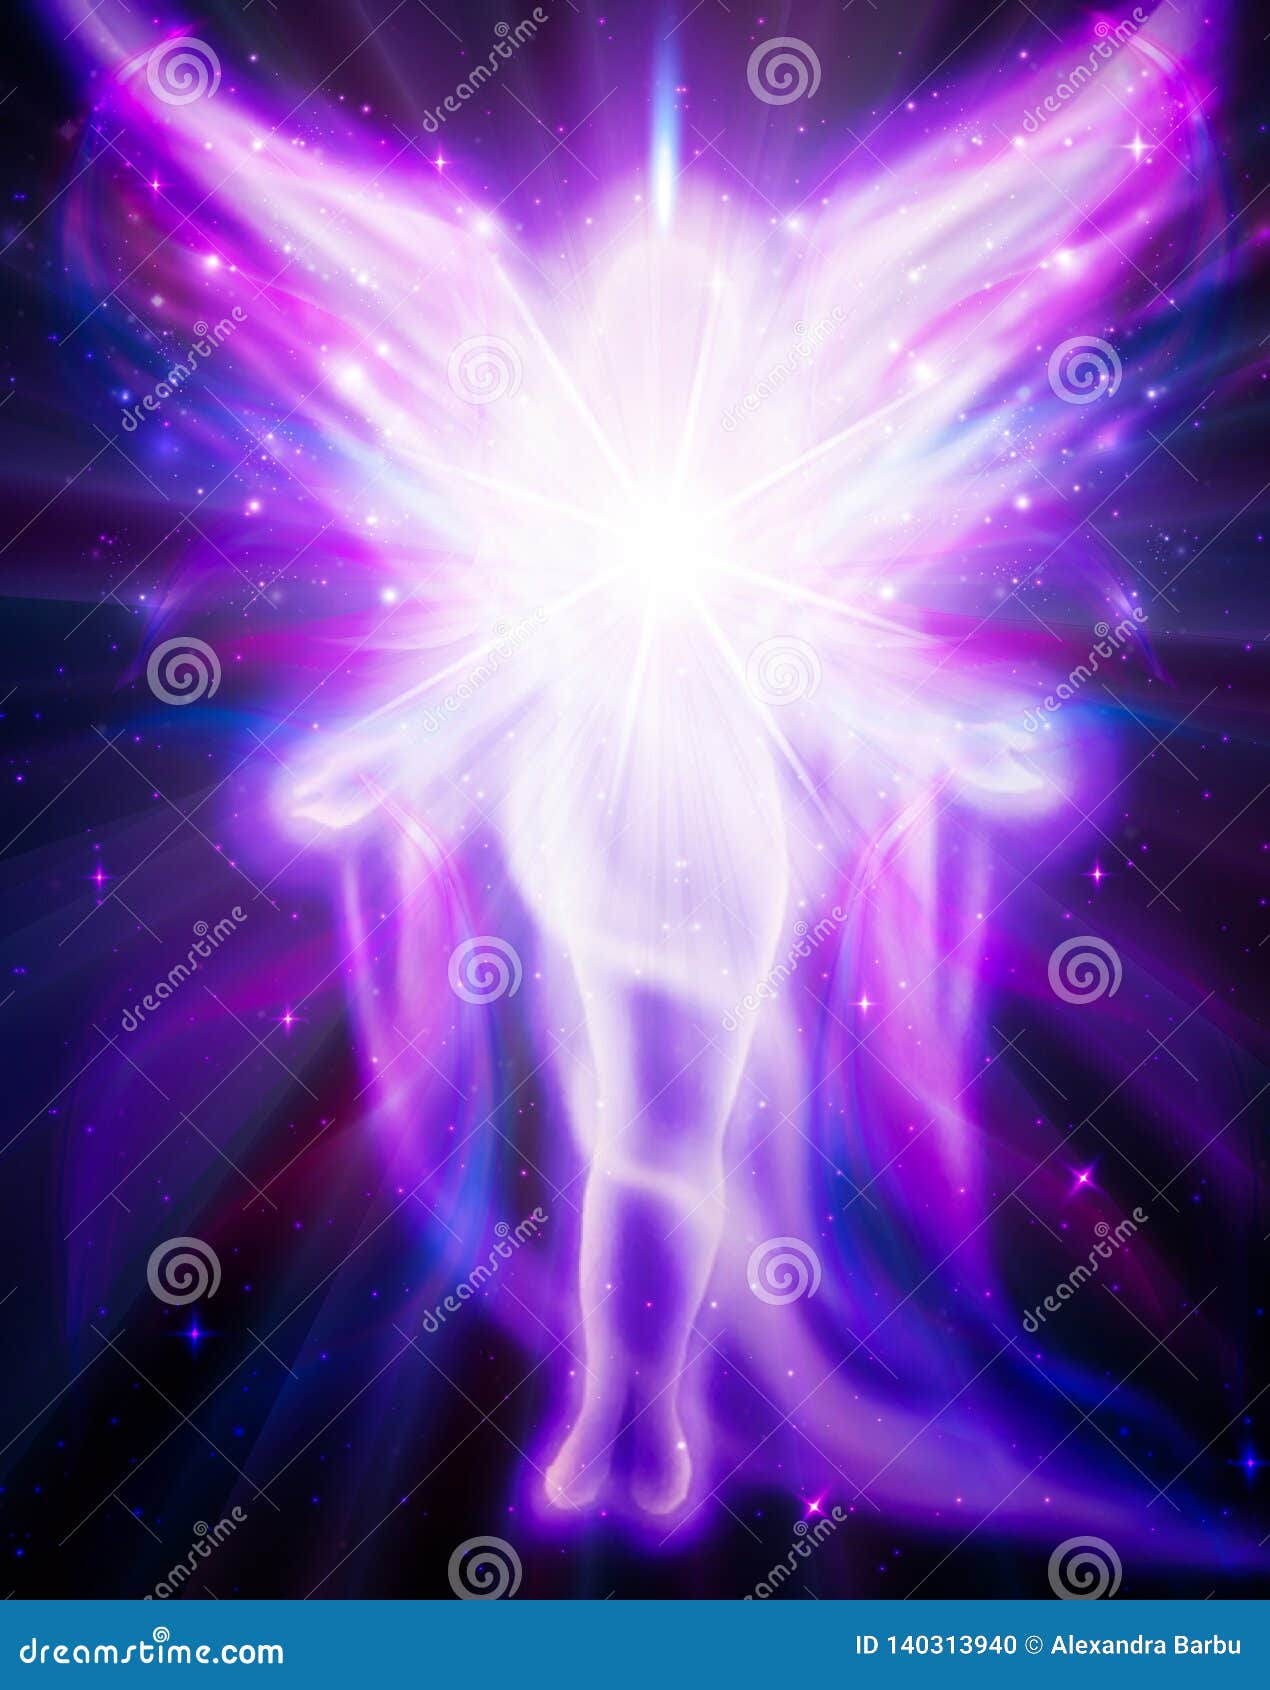 angel of light and love doing a miracle, angel meditation